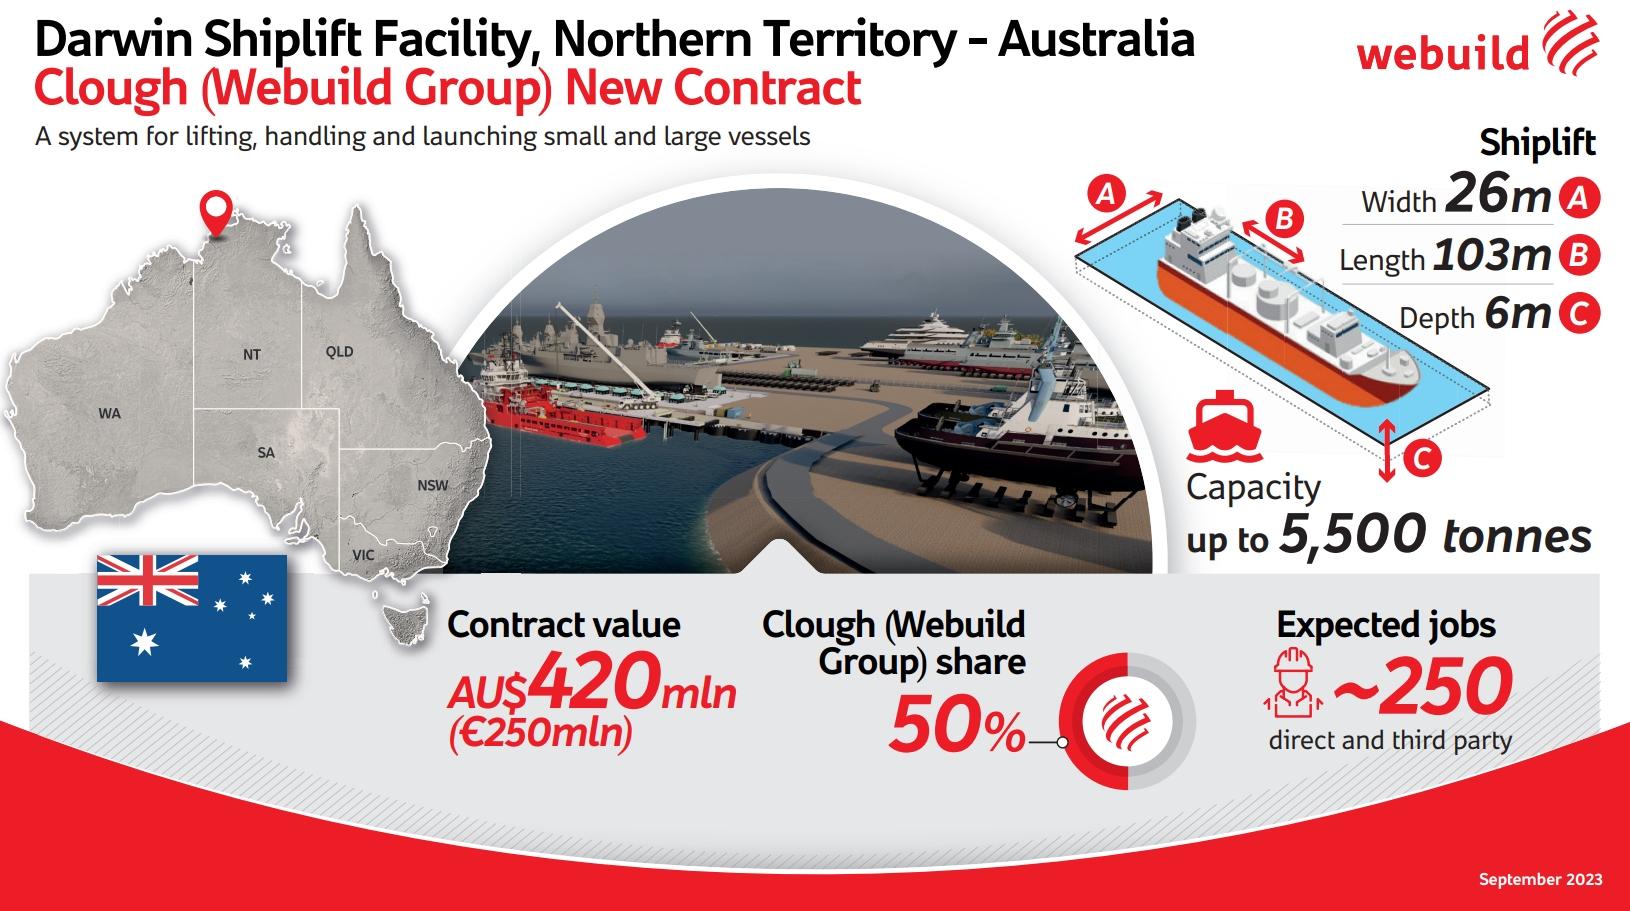 Webuild grows in Australia with expansion in maritime sector: Clough jv wins AU$420 mln contract